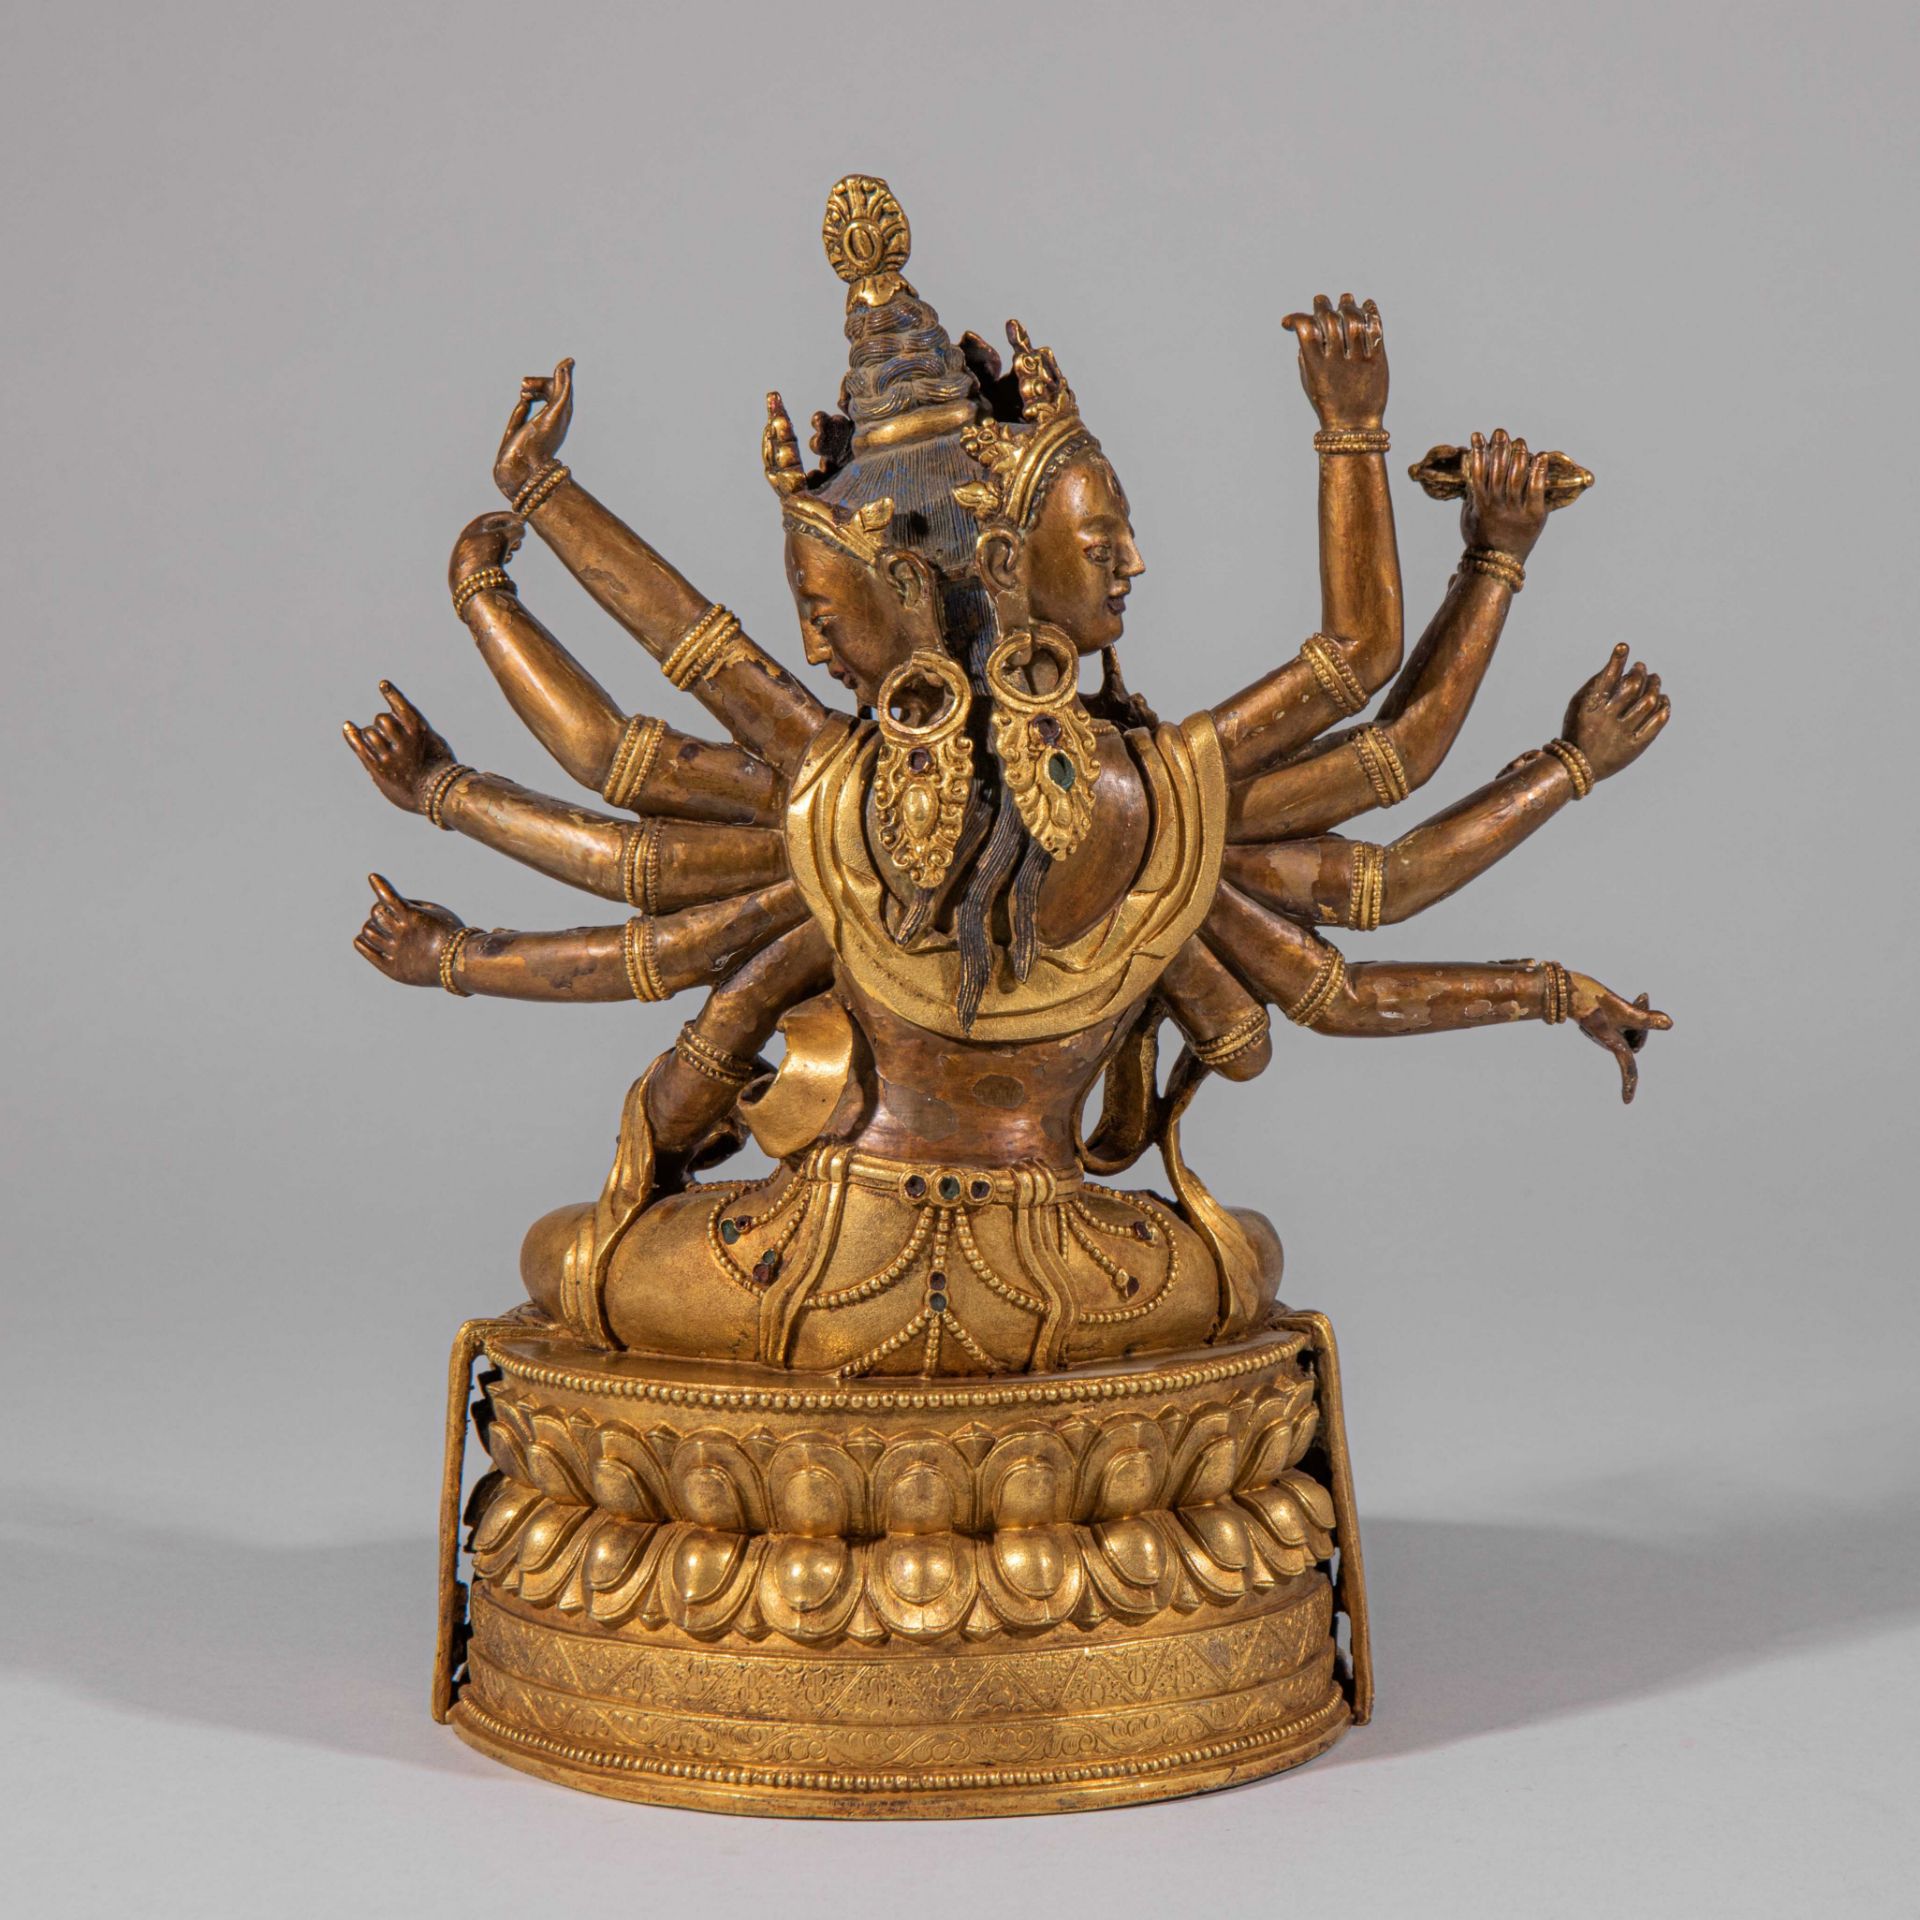 A Gilt Bronze Statue of Guanyin with Ten Arms, Qing Dynasty, China - Image 8 of 11